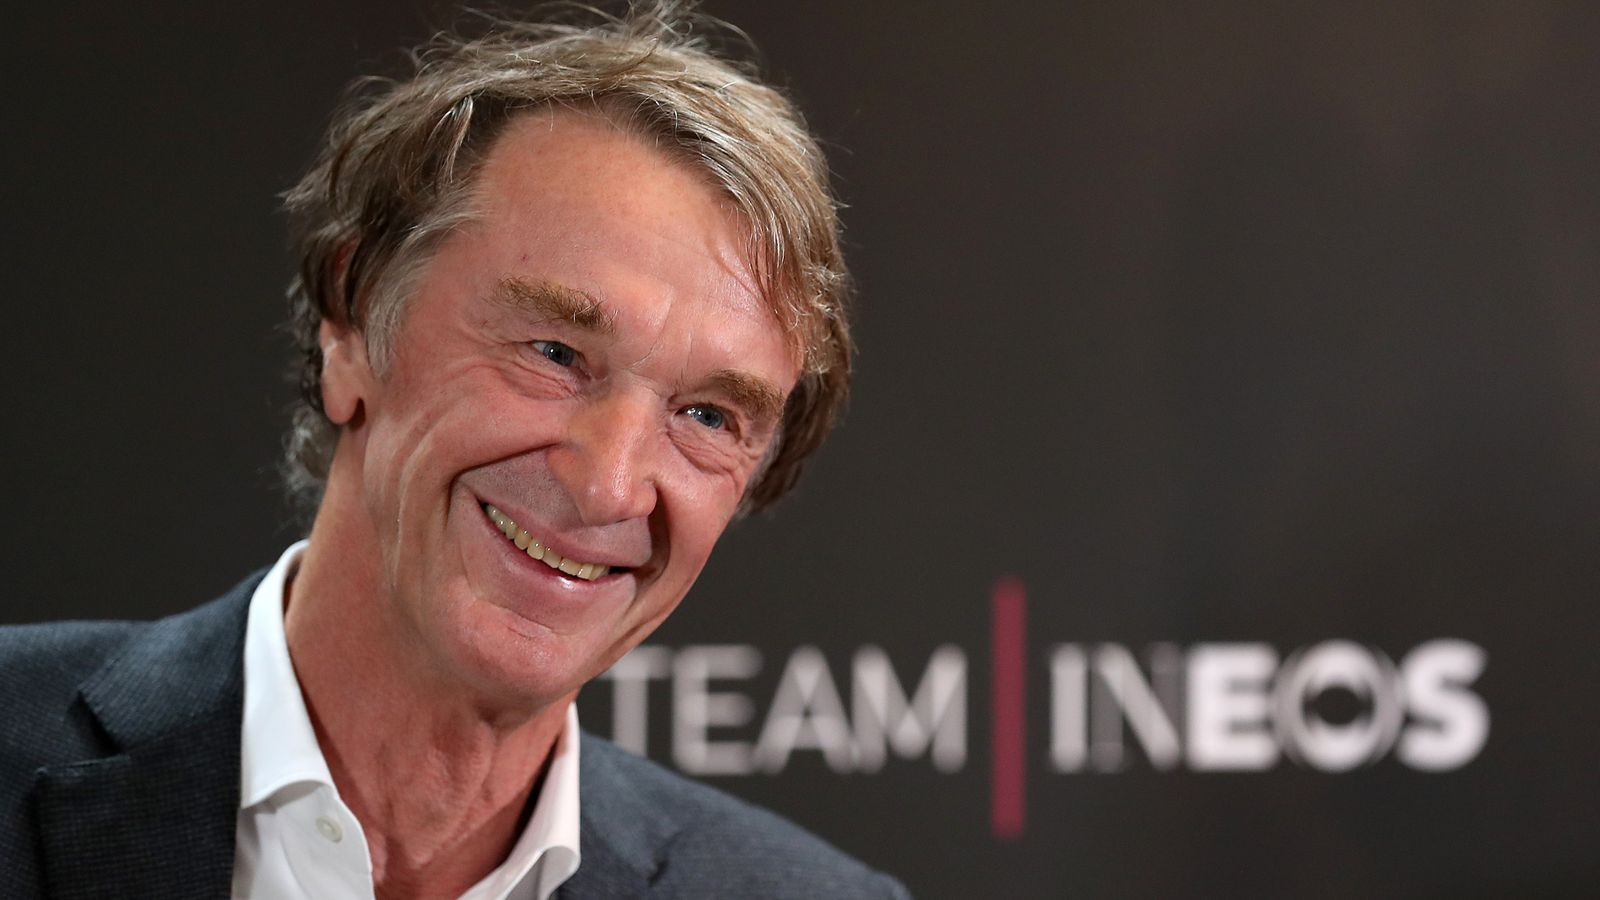 Sir Jim Ratcliffe asks Manchester United fans for 'time and patience' following 25% purchase